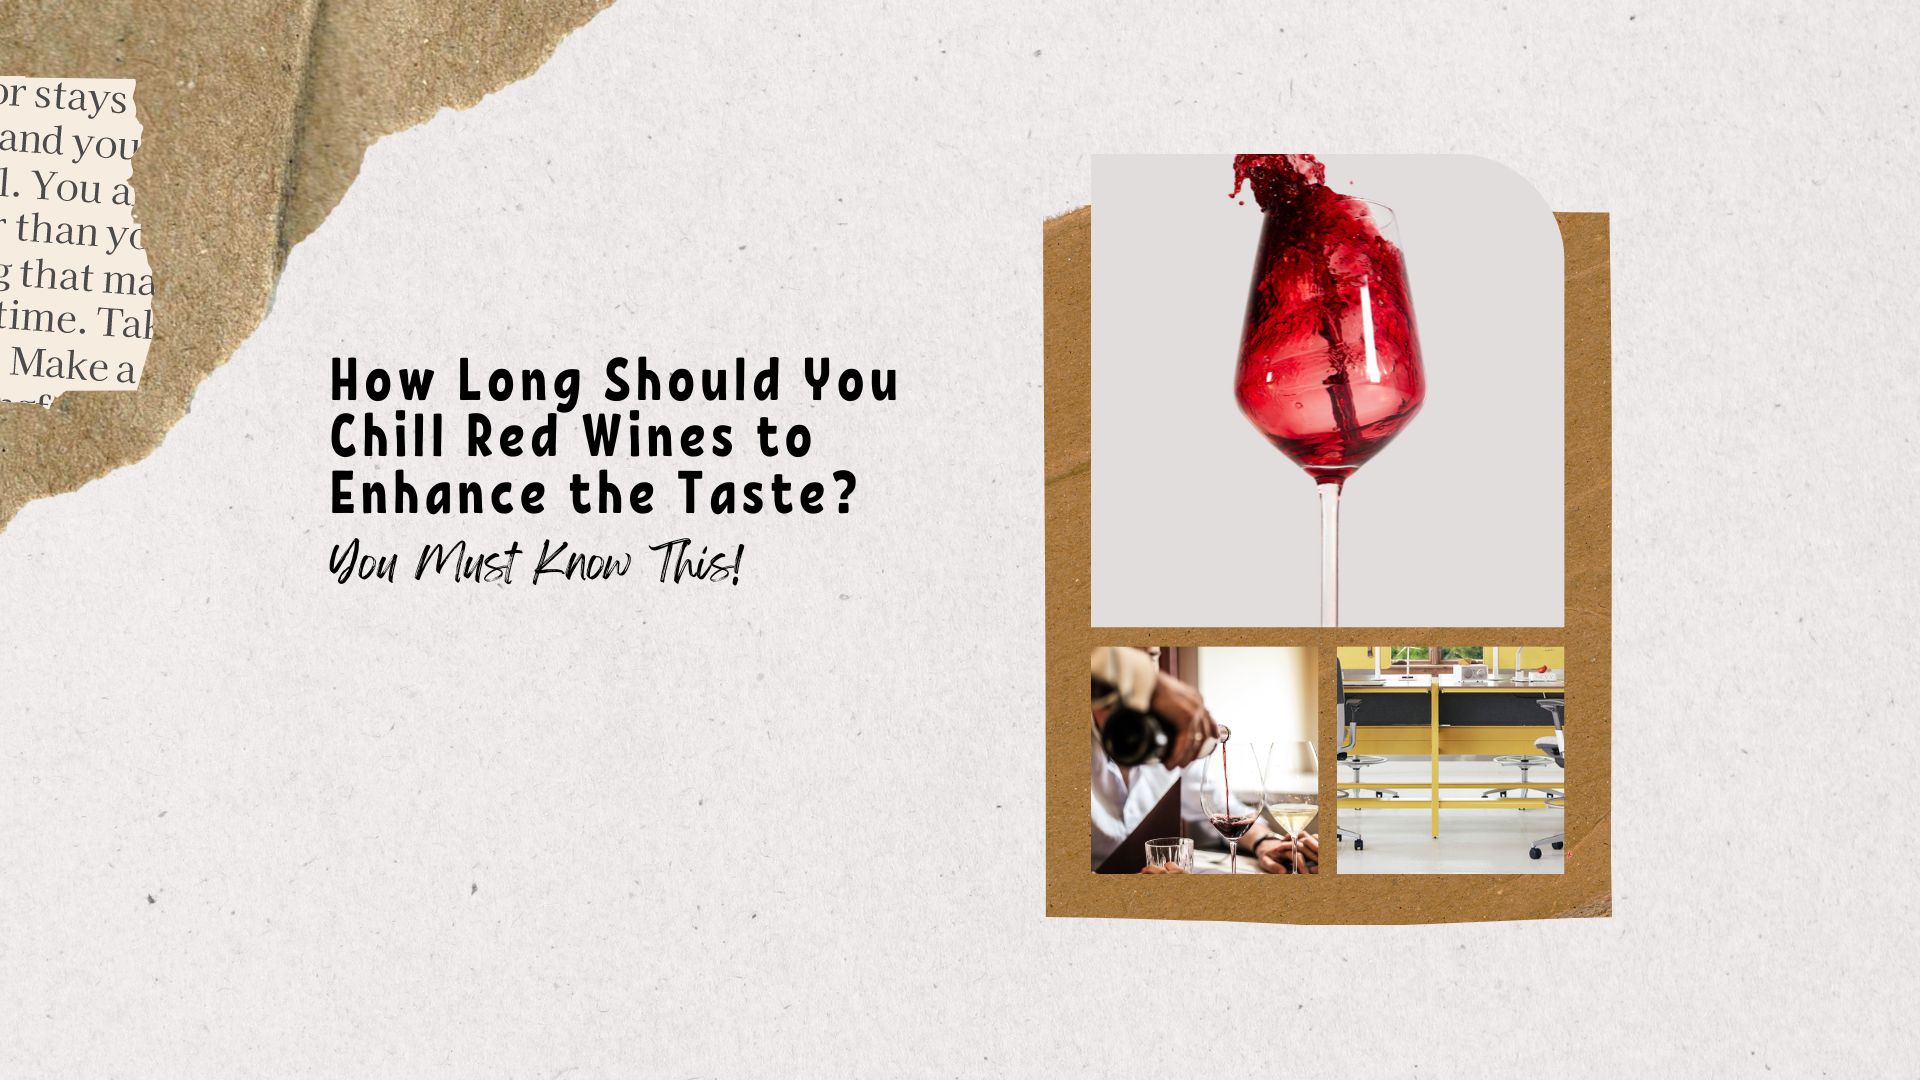 How Long Should You Chill Red Wines to Enhance the Taste? You Must Know This!